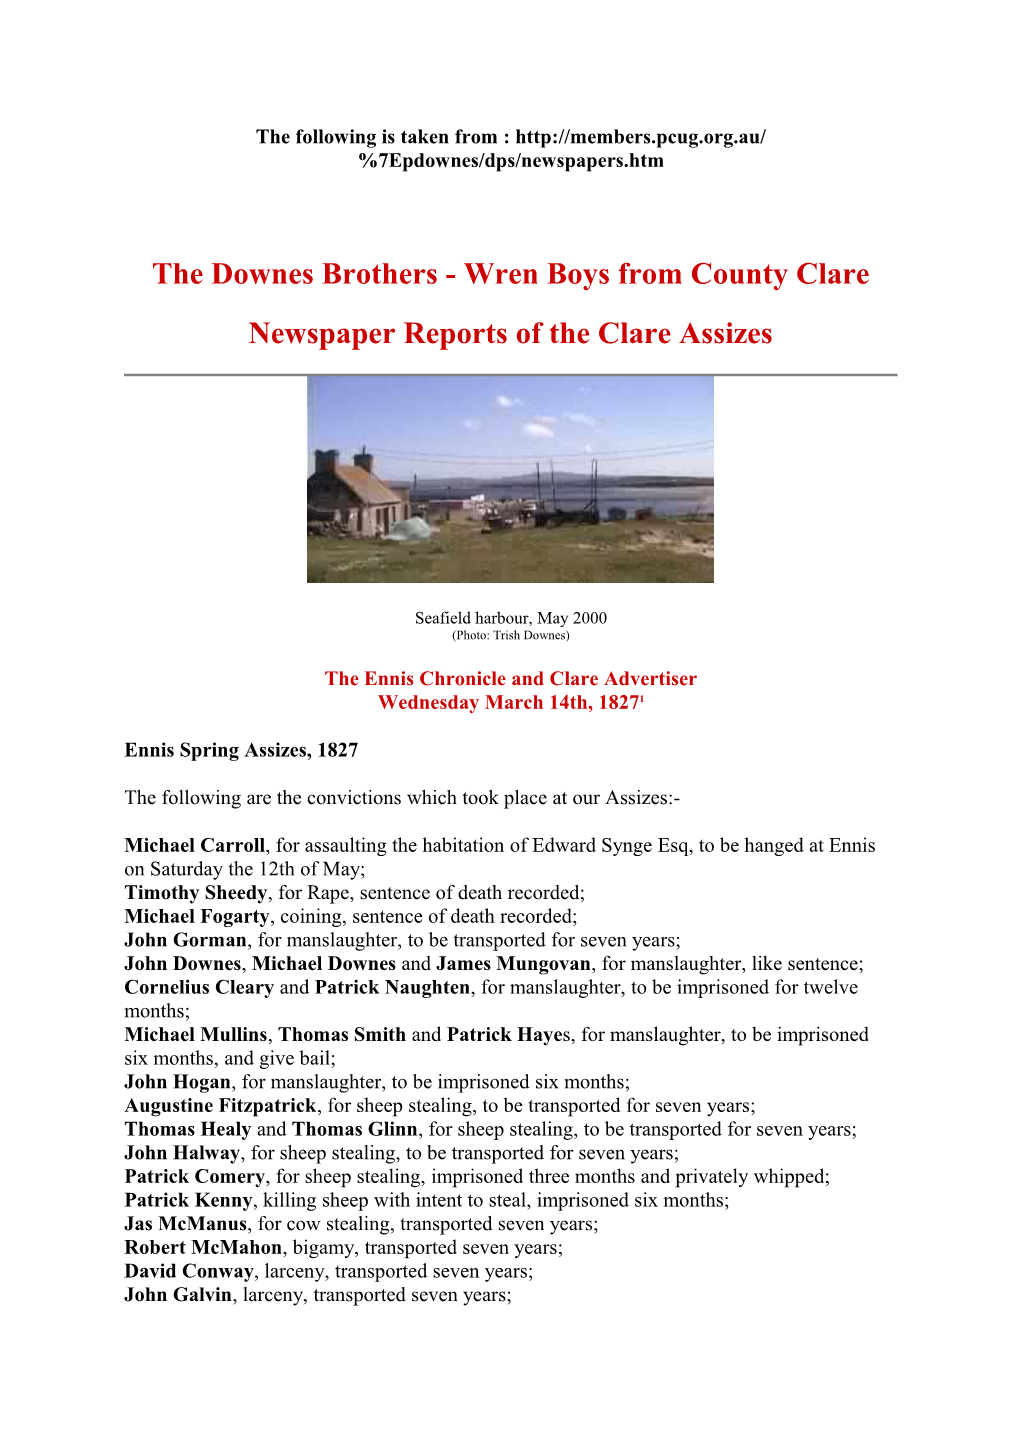 The Downes Brothers - Wren Boys from County Clare